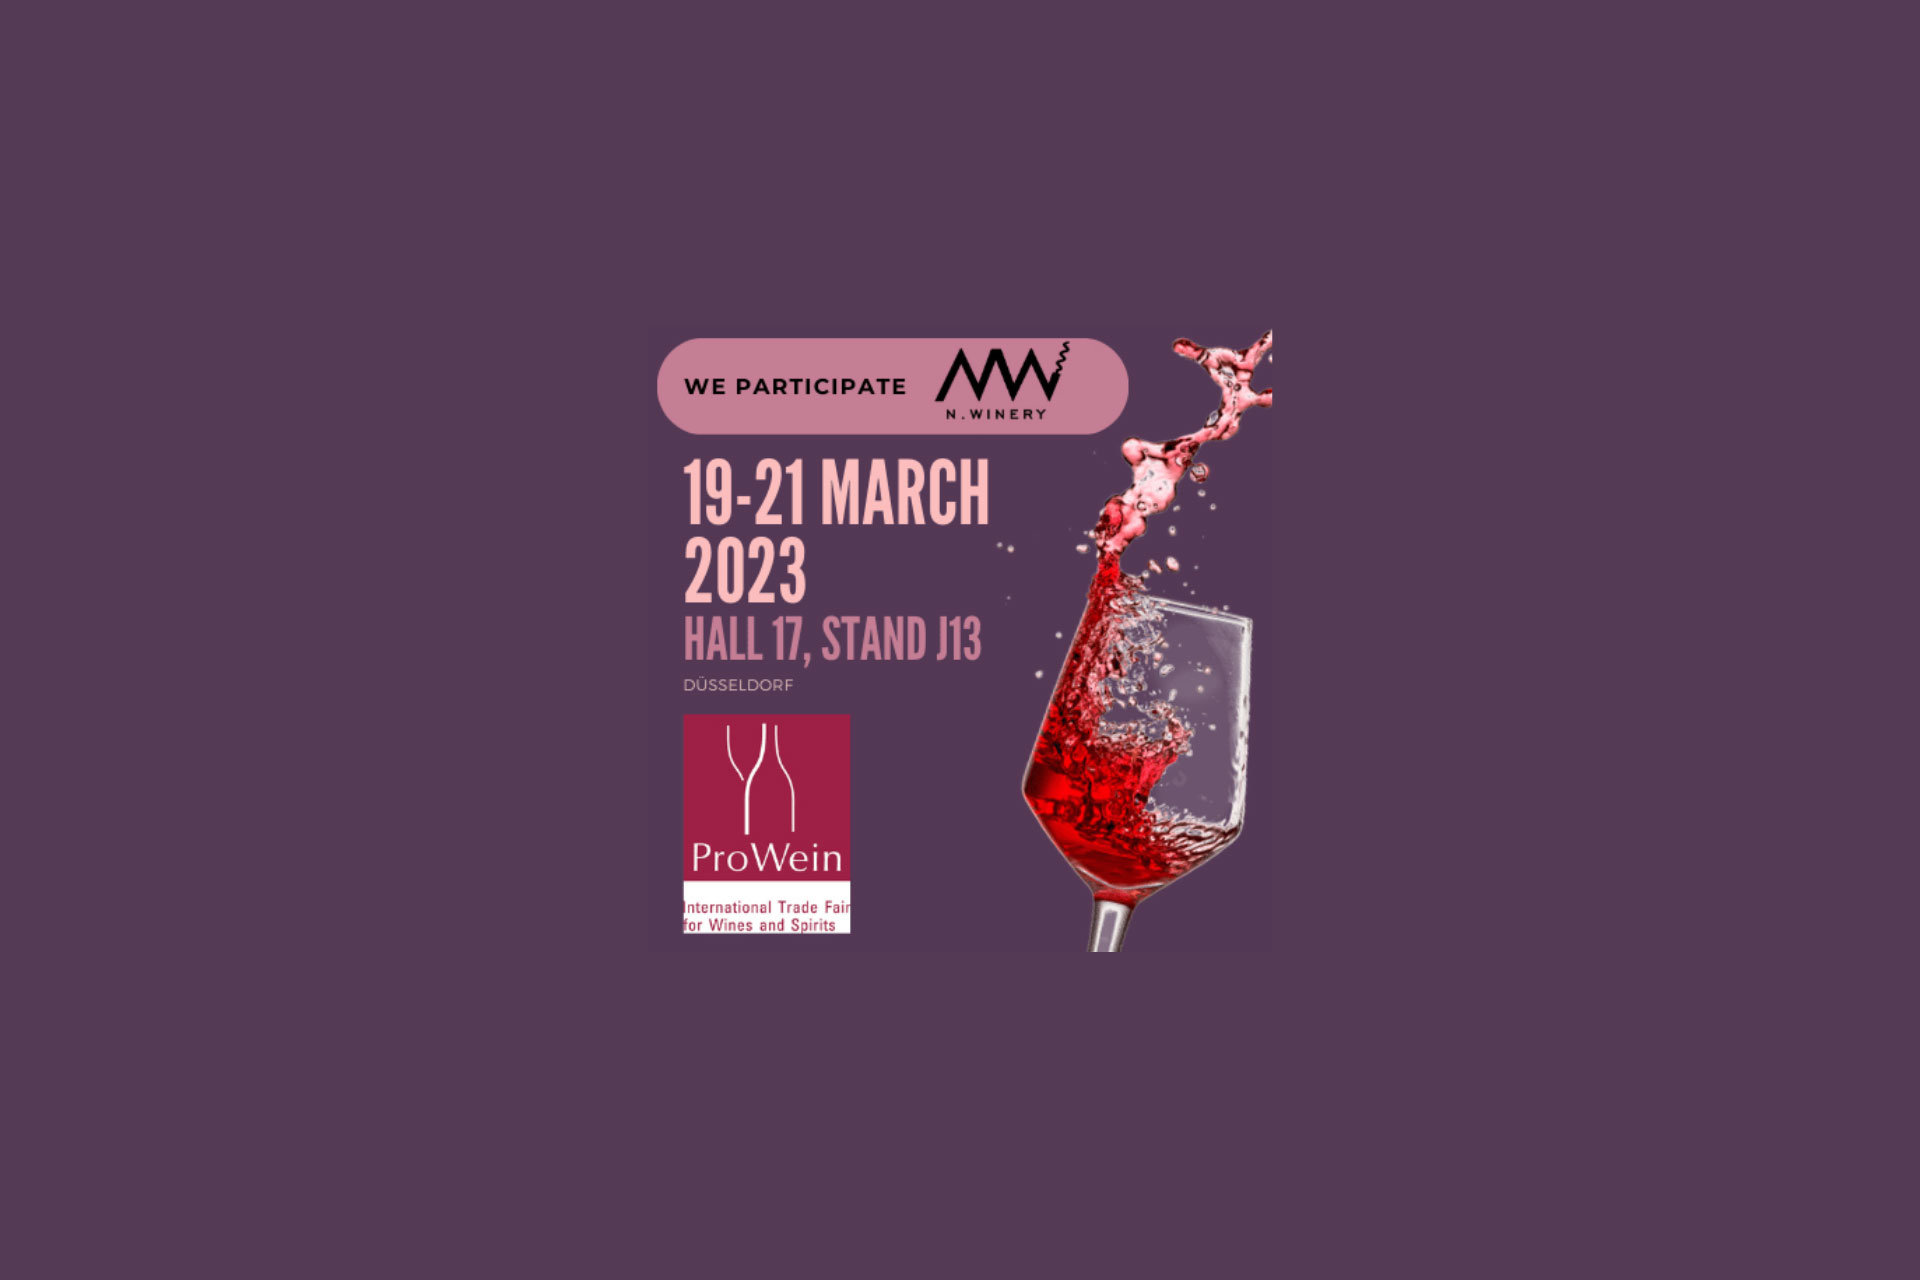 We participate in ProWein on March 19-21 Room 17 Stand J13